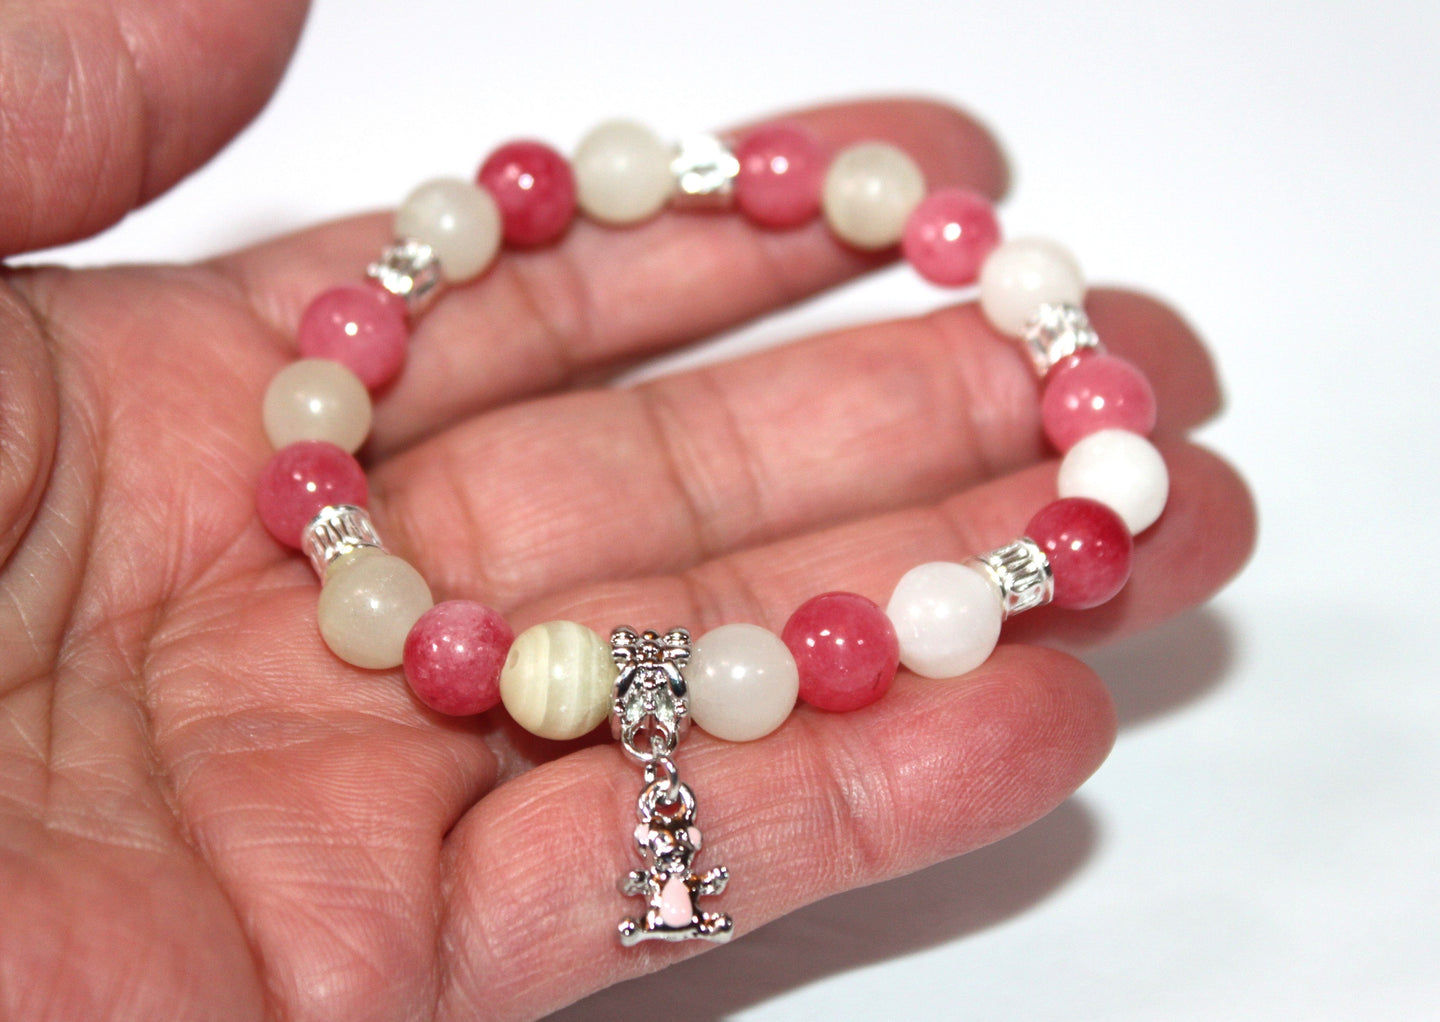 teddy bear GENUINE Natural Stones/Healing Crystals, hand-crafted bracelets (Pink Agate/color options). Adorned with silver or gold charms.